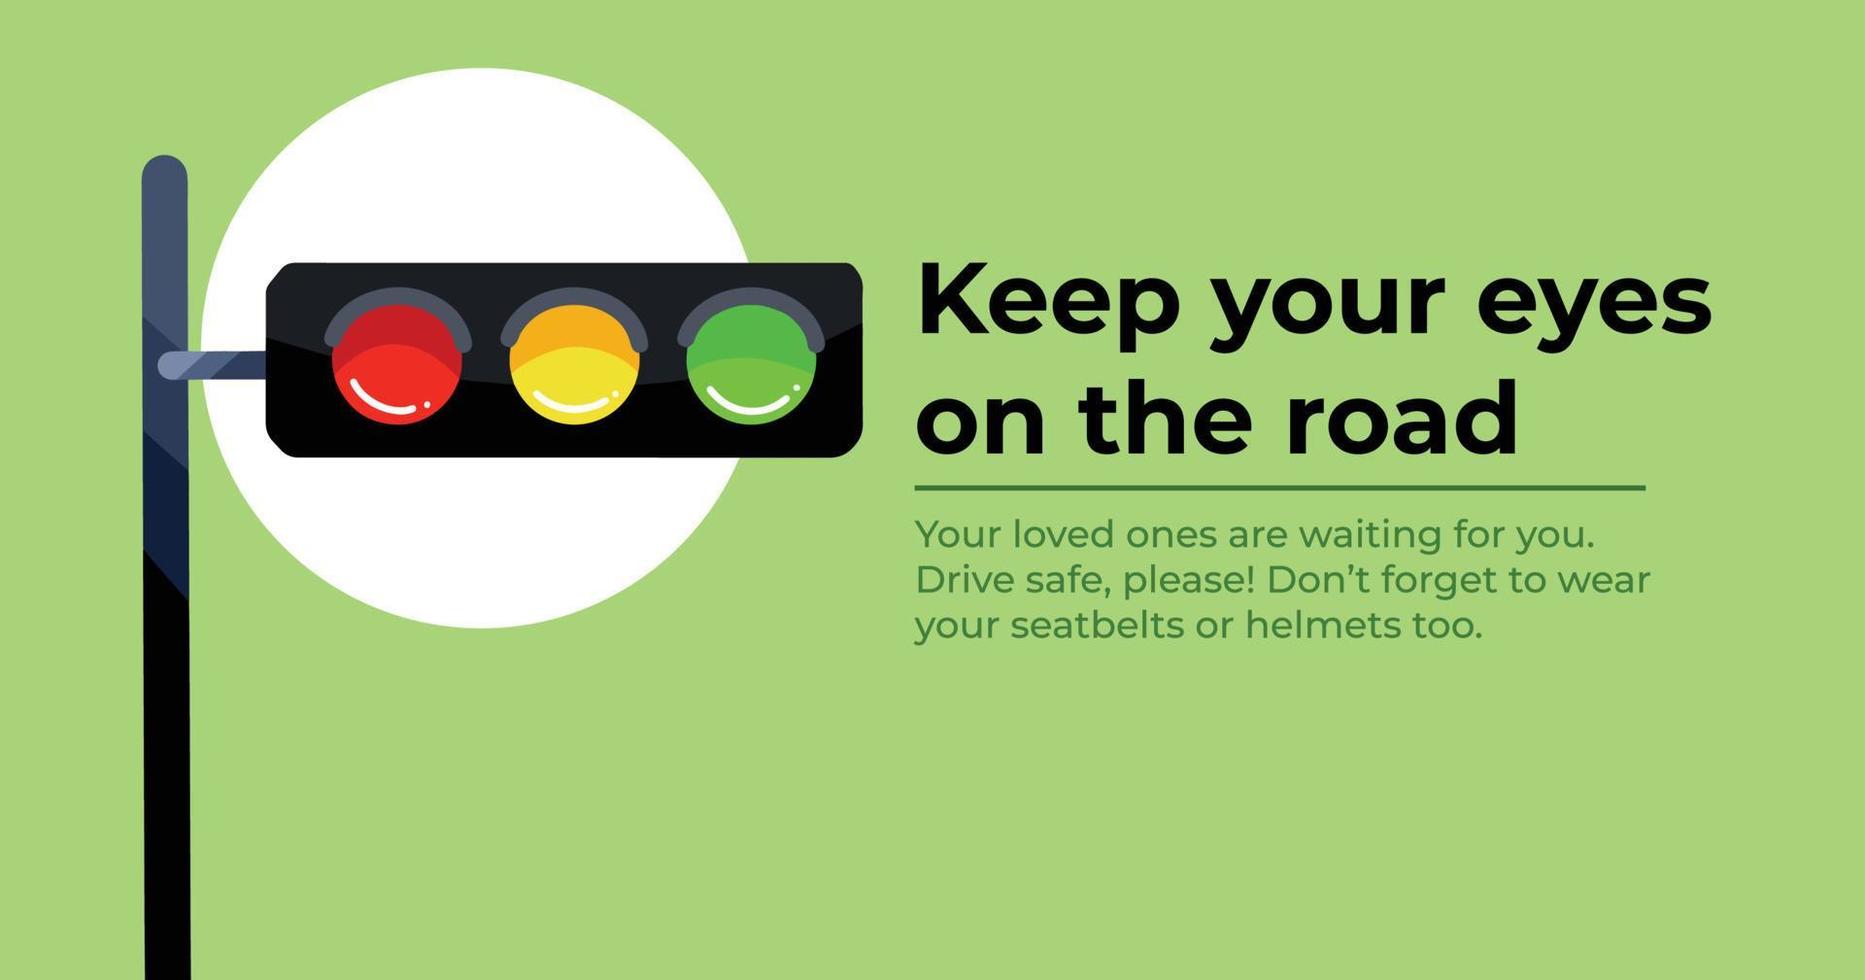 Keep your eyes on the road. Traffic lights vector illustration banner or poster layout design isolated on landscape template. Simple flat drawing. Website or print brochure template.